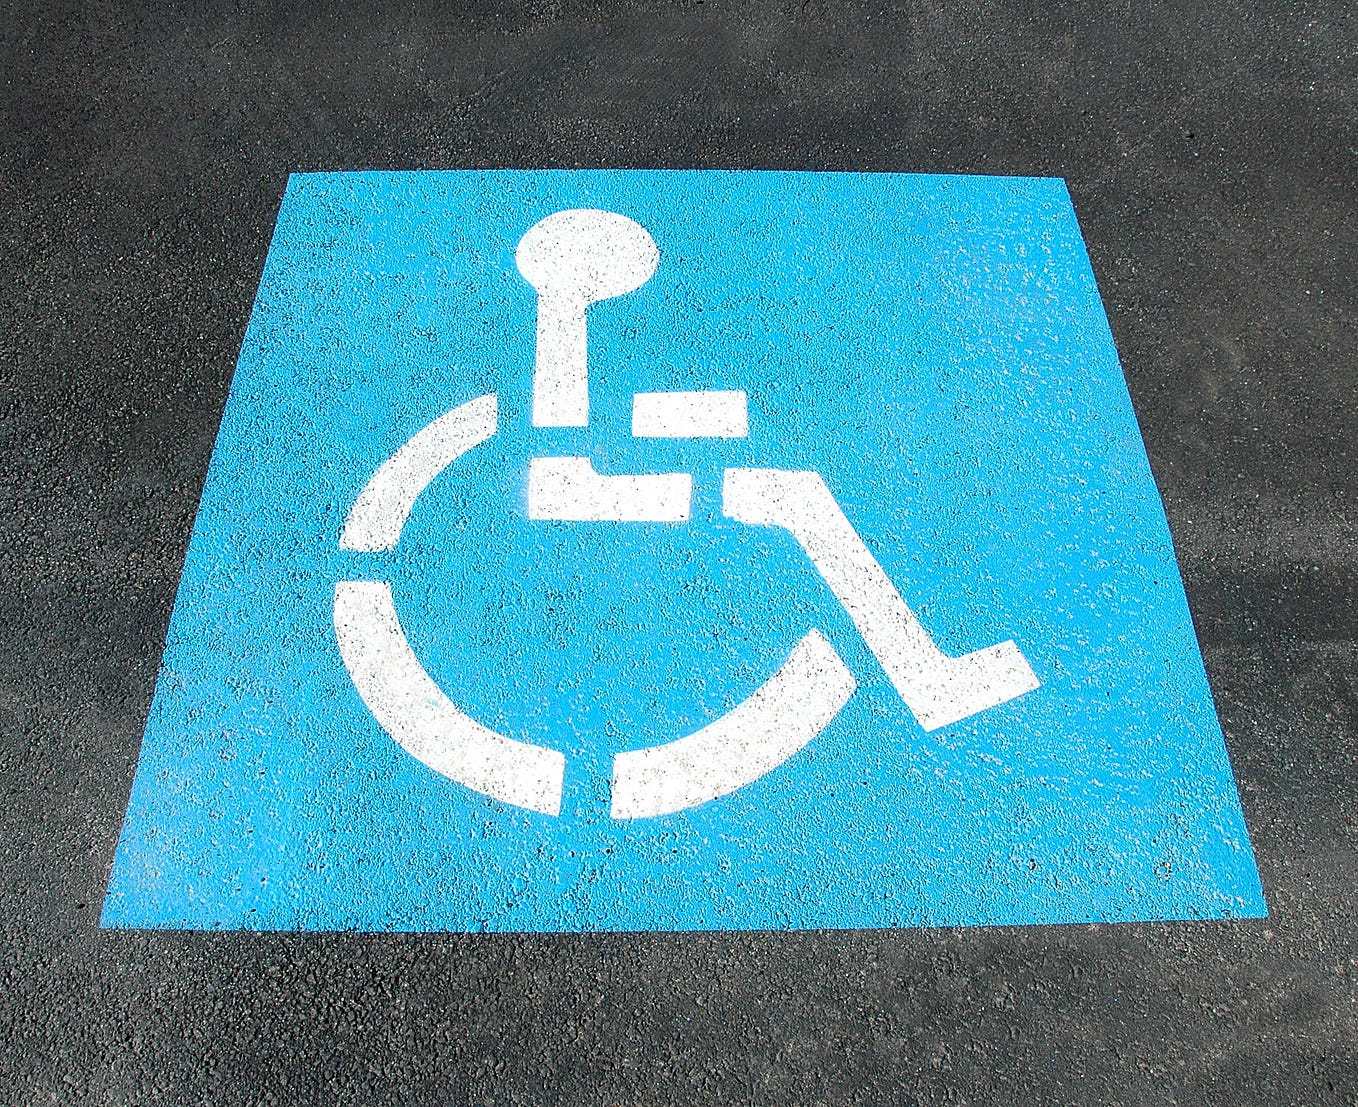 The House is trying to end the Americans with Disabilities Act as we know it